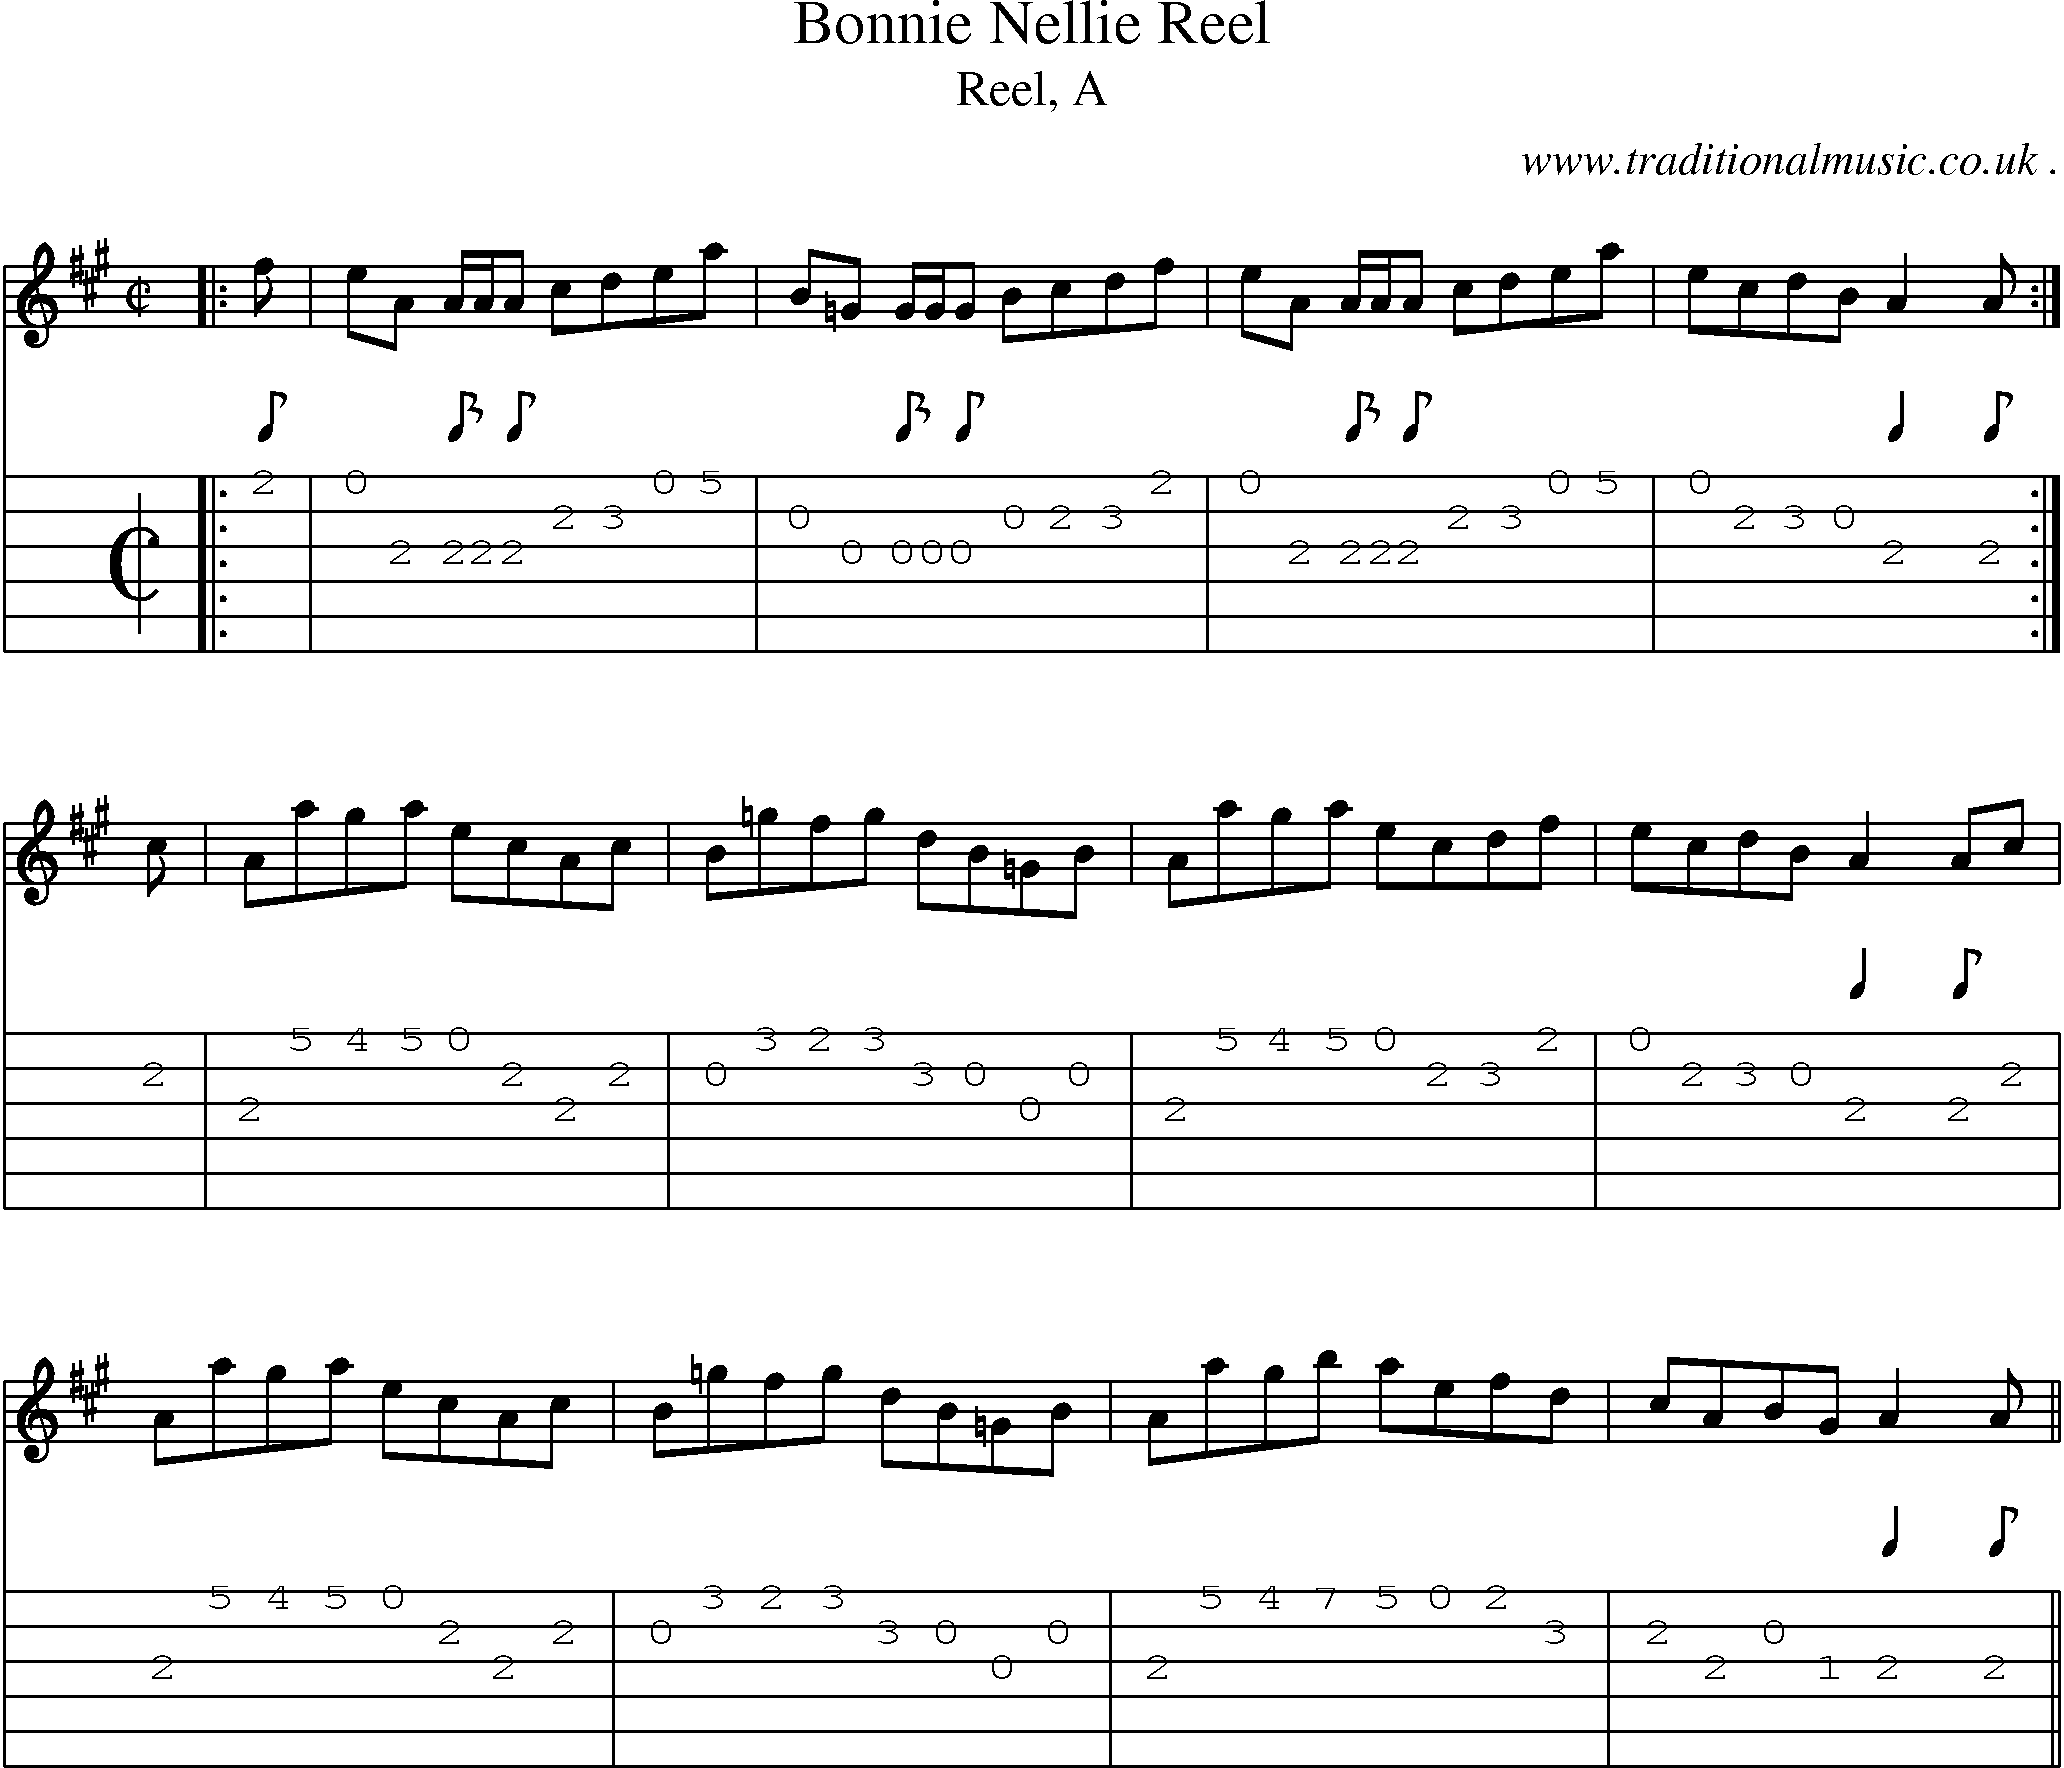 Sheet-music  score, Chords and Guitar Tabs for Bonnie Nellie Reel